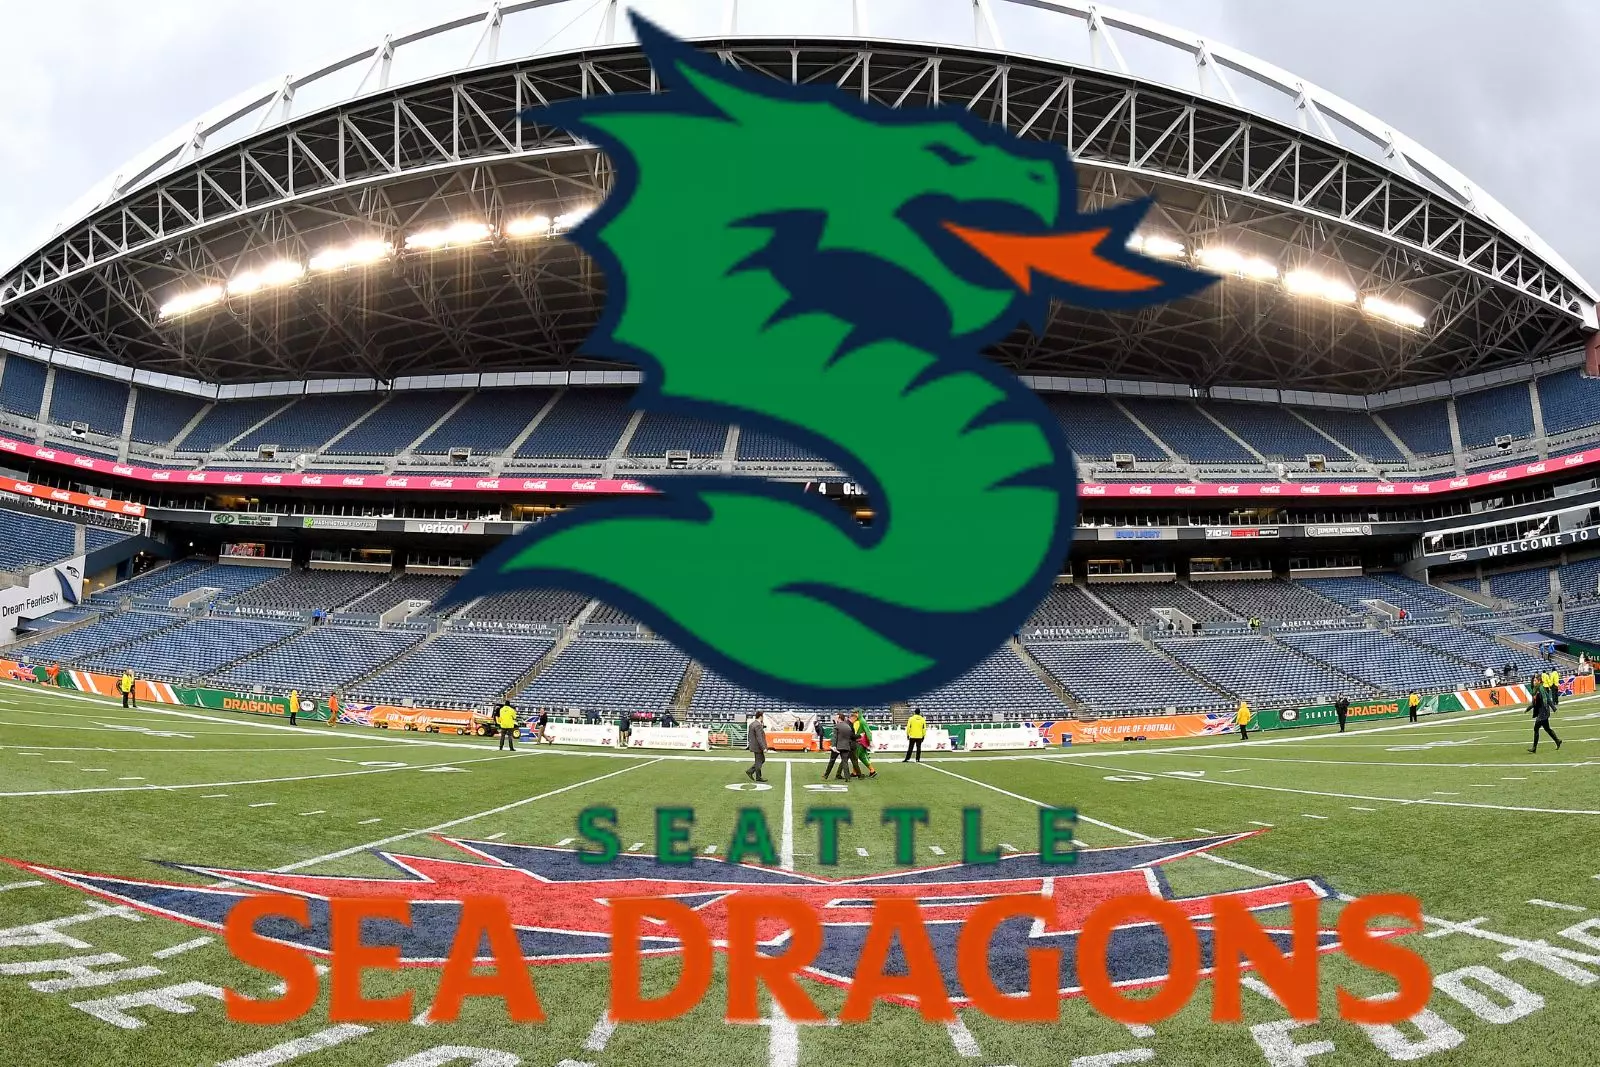 Seattle Storm - Good luck to Seattle Sea Dragons in their